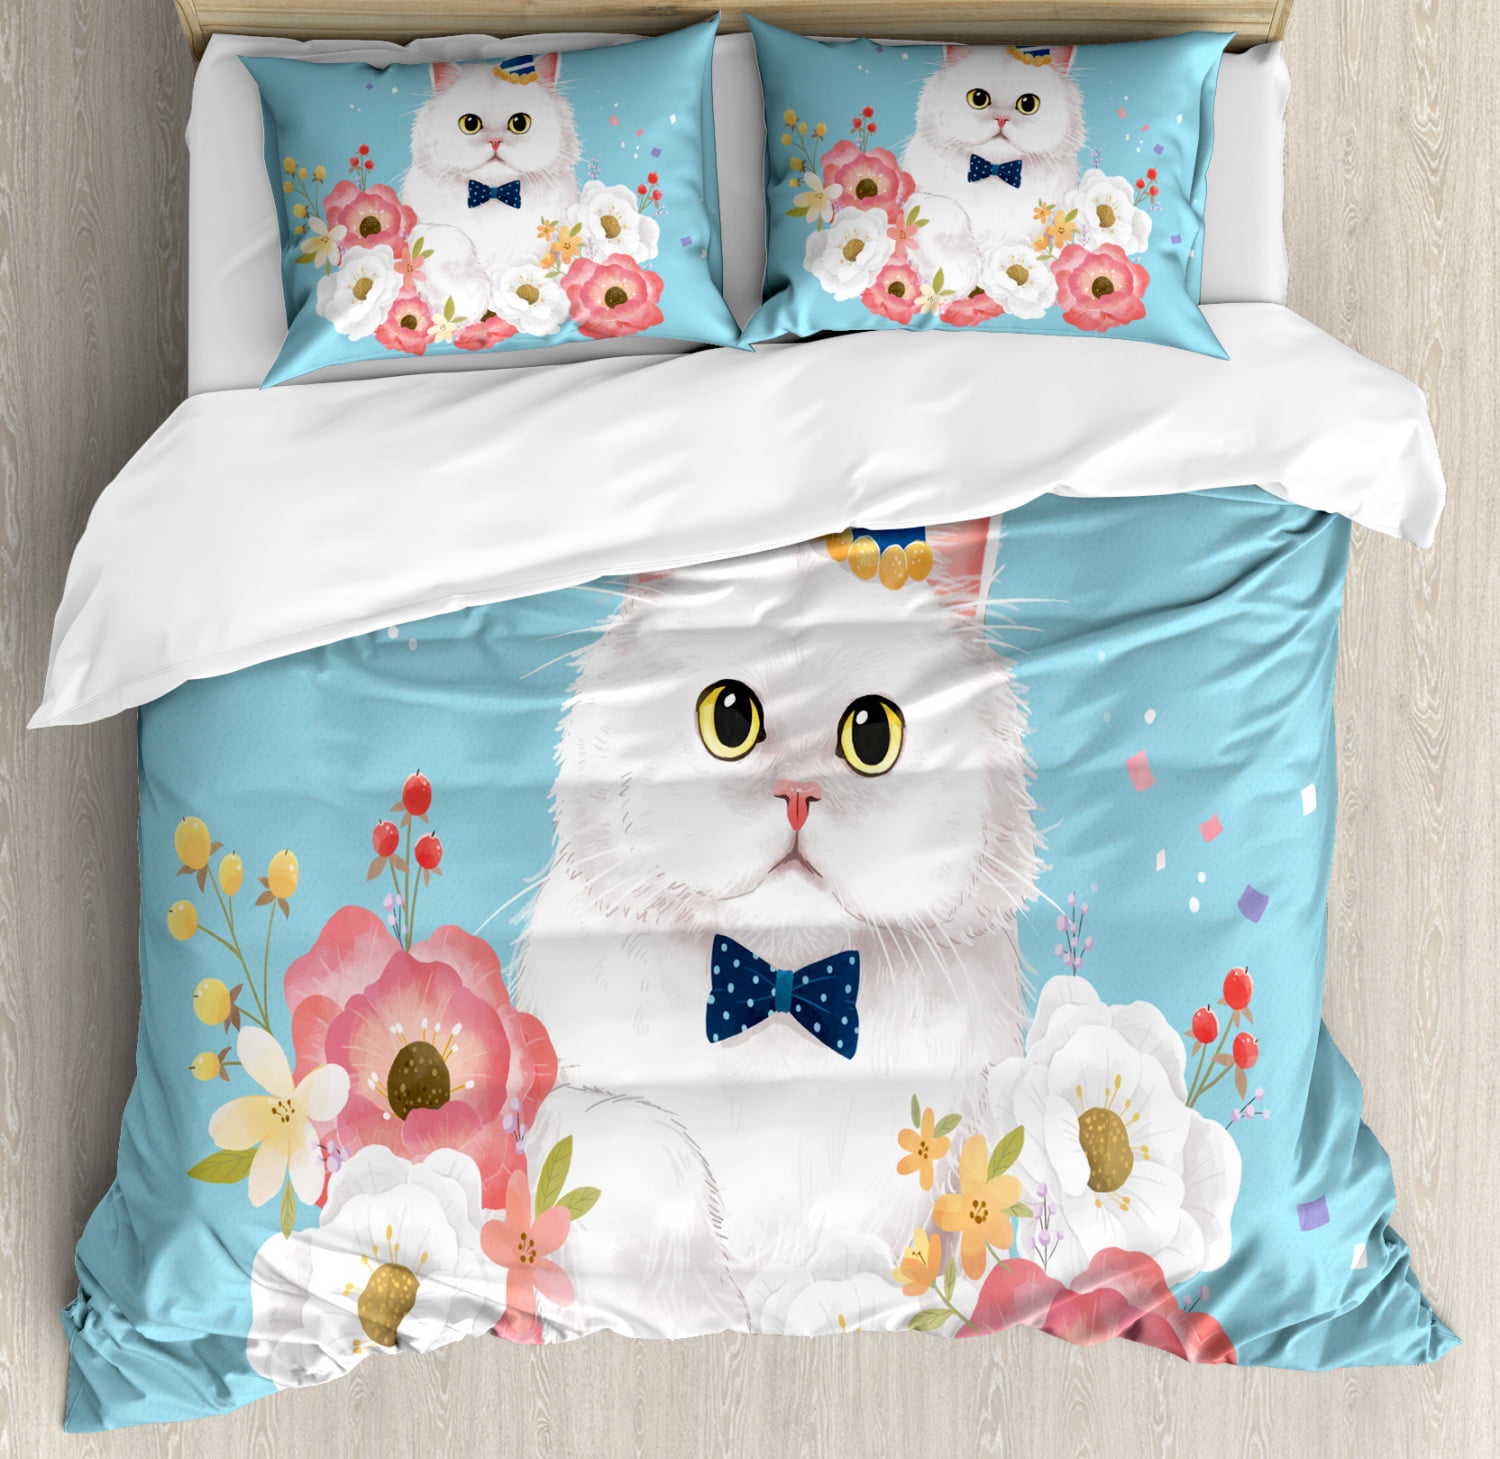 CUDDLE CATS DOUBLE DUVET COVER AND PILLOWCASE SET KITTENS BEDDING 